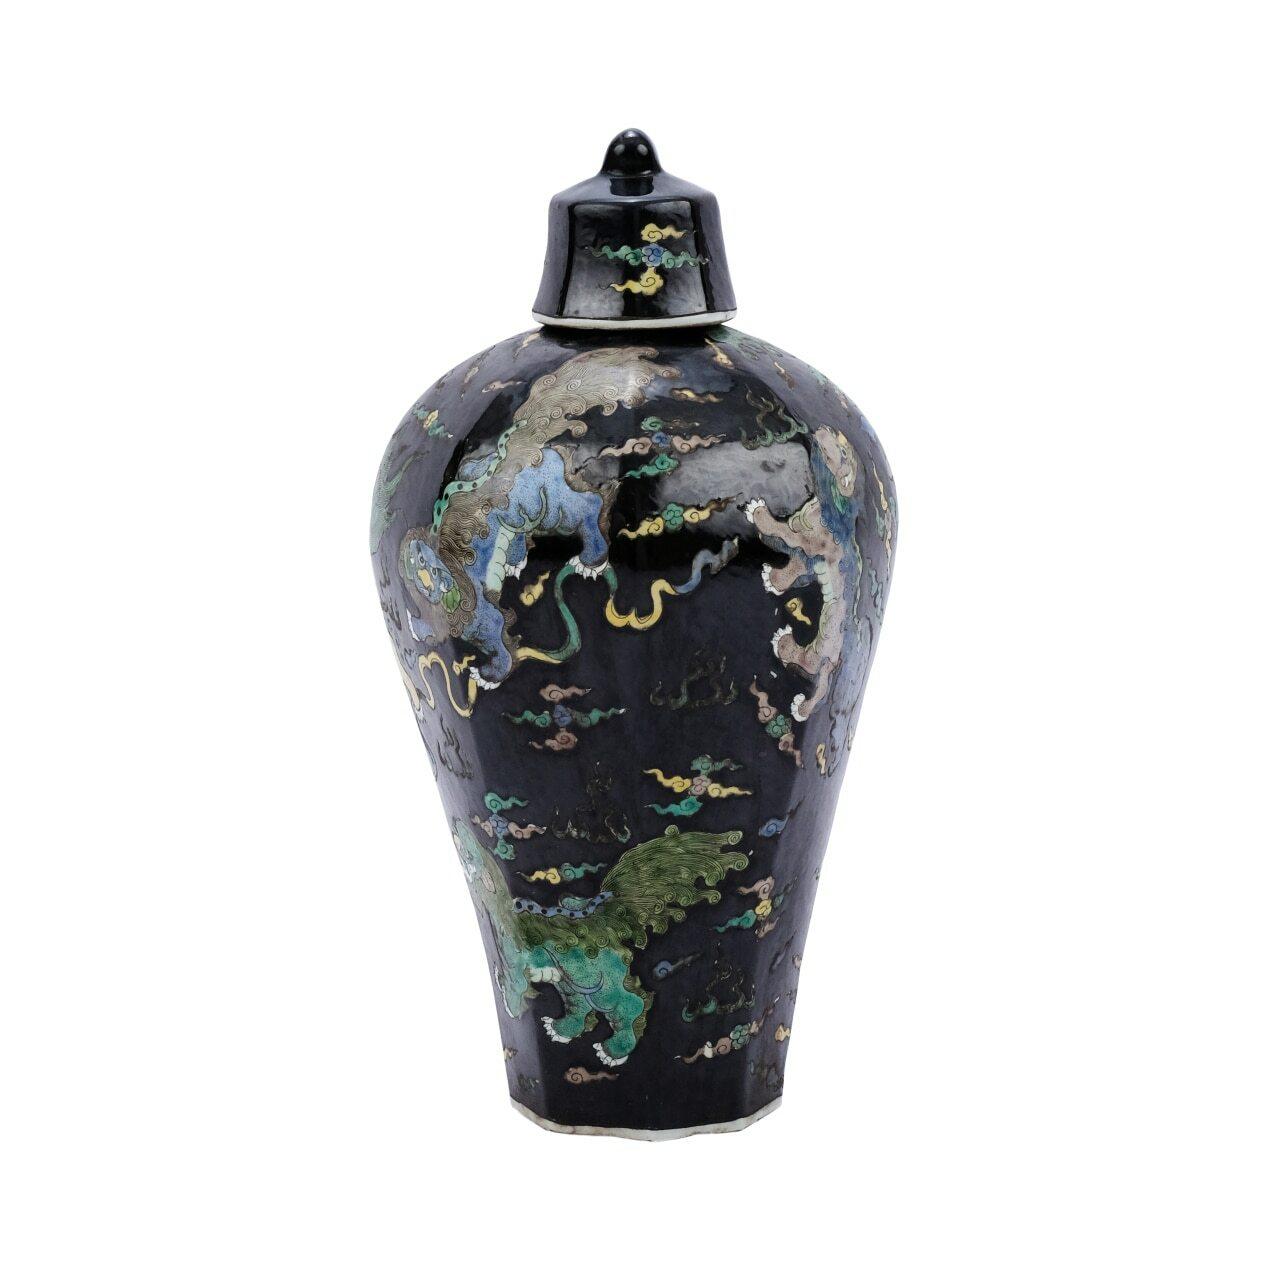 Black hex lidded prunus porcelain vase lion motif

Shape: Vase
Color: Black
Size (inches): 8.5W x 8.5D x 17H

Warranty Information: Each piece was handcrafted by skill and joy. Imperfection is part of the characters. Minor variation of